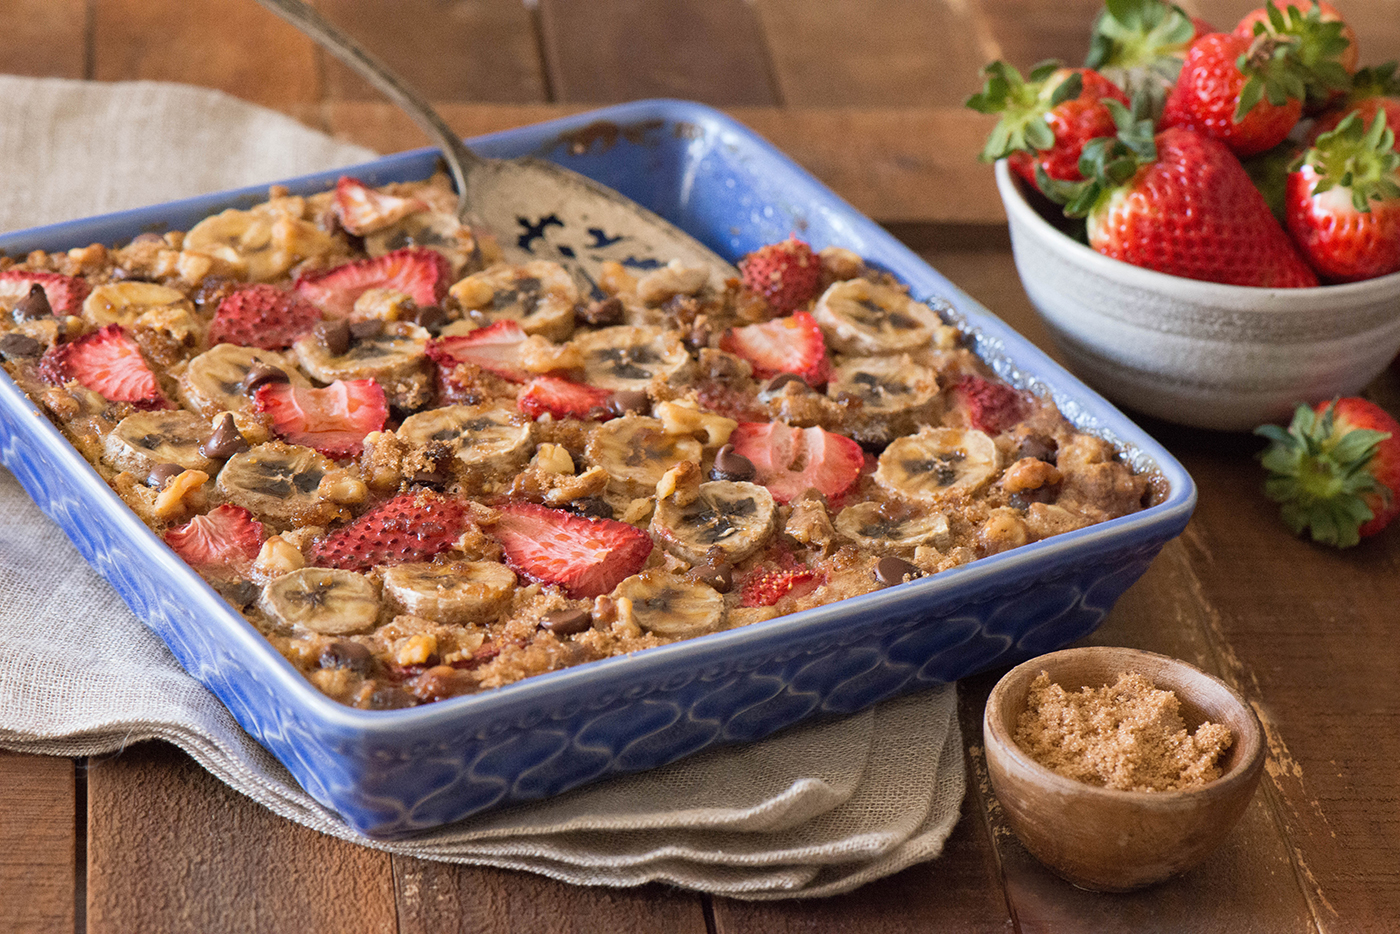 Oatmeal Bake with Strawberries and Bananas